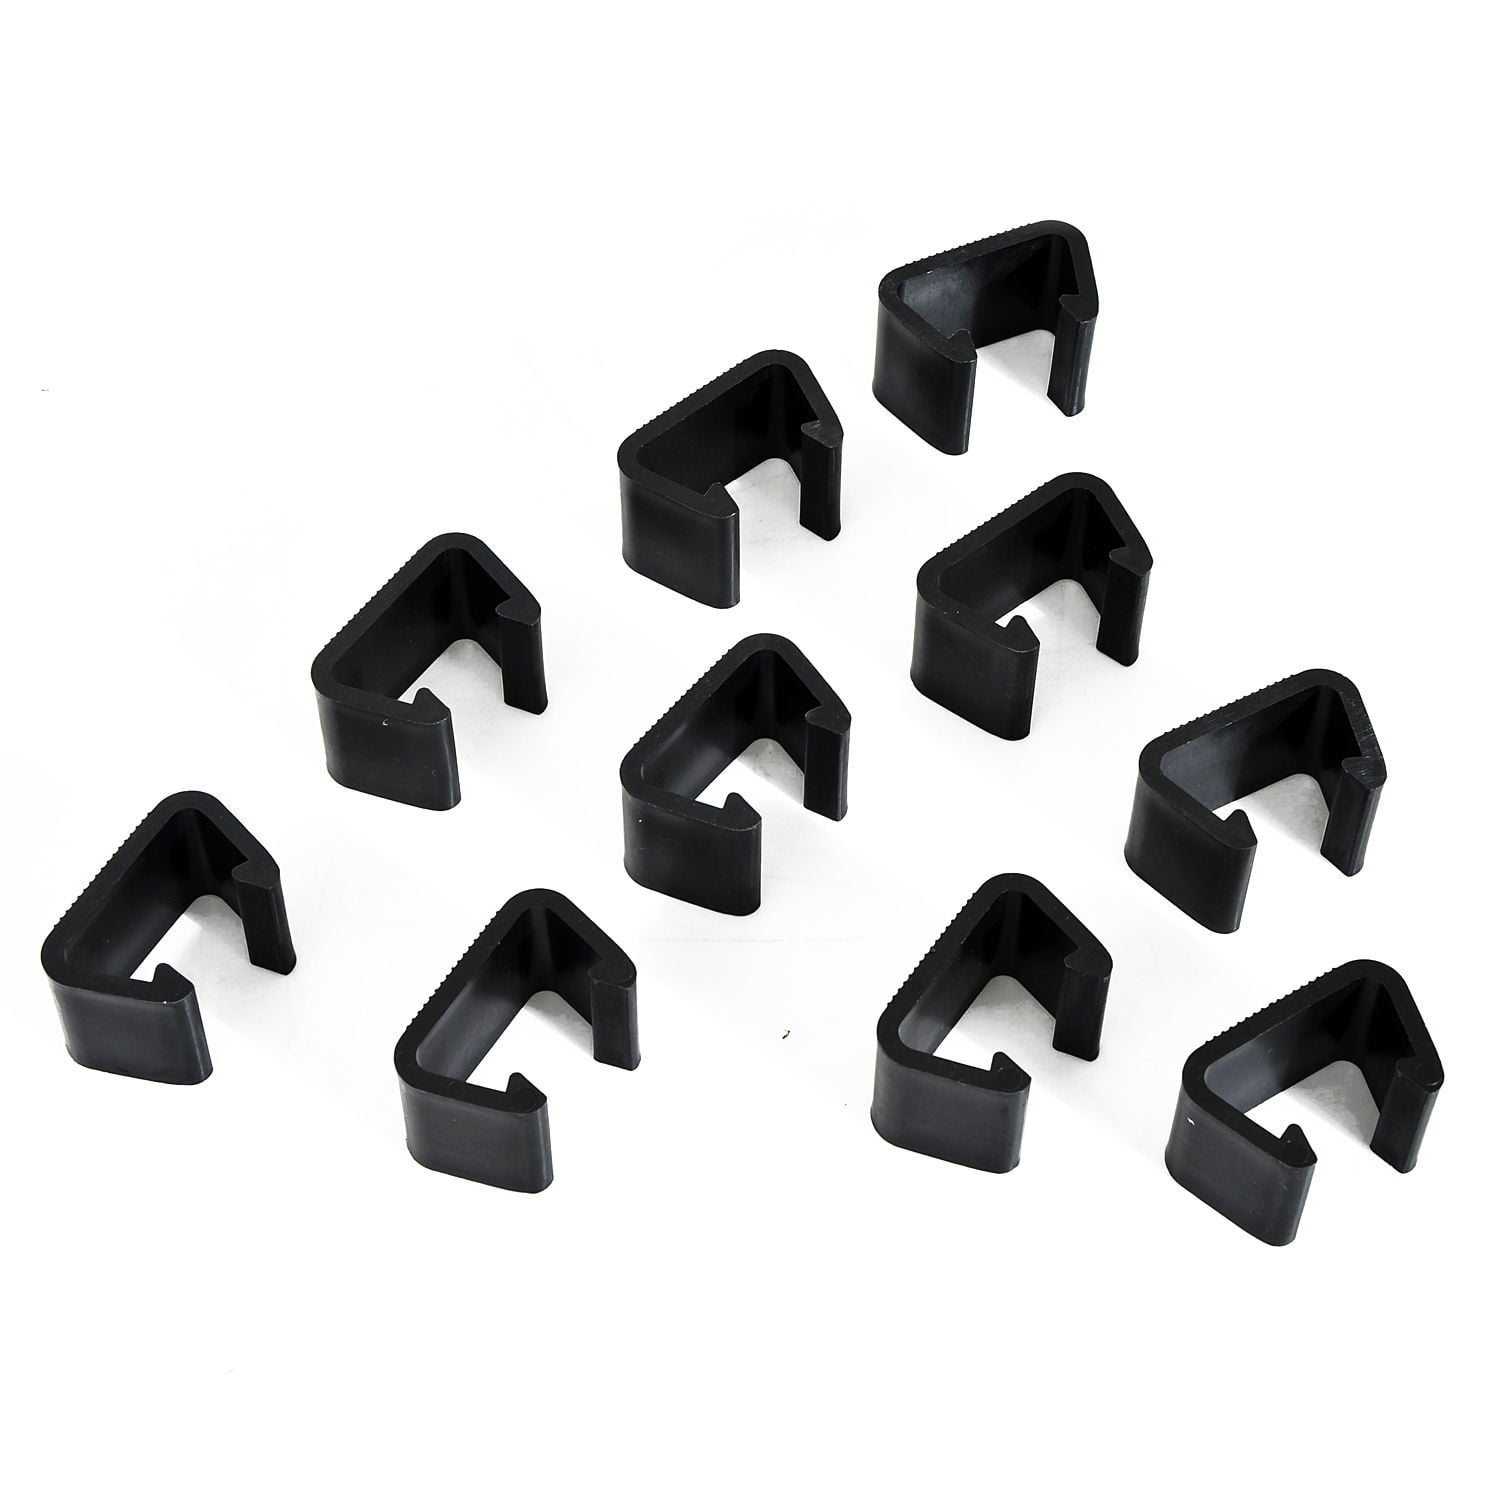 Outdoor Patio Furniture Sets HTTH Garden Furniture Connector Black Sofa Fasteners Clip Sectional Connector Alignment Fasteners for Sofa 12 Pieces